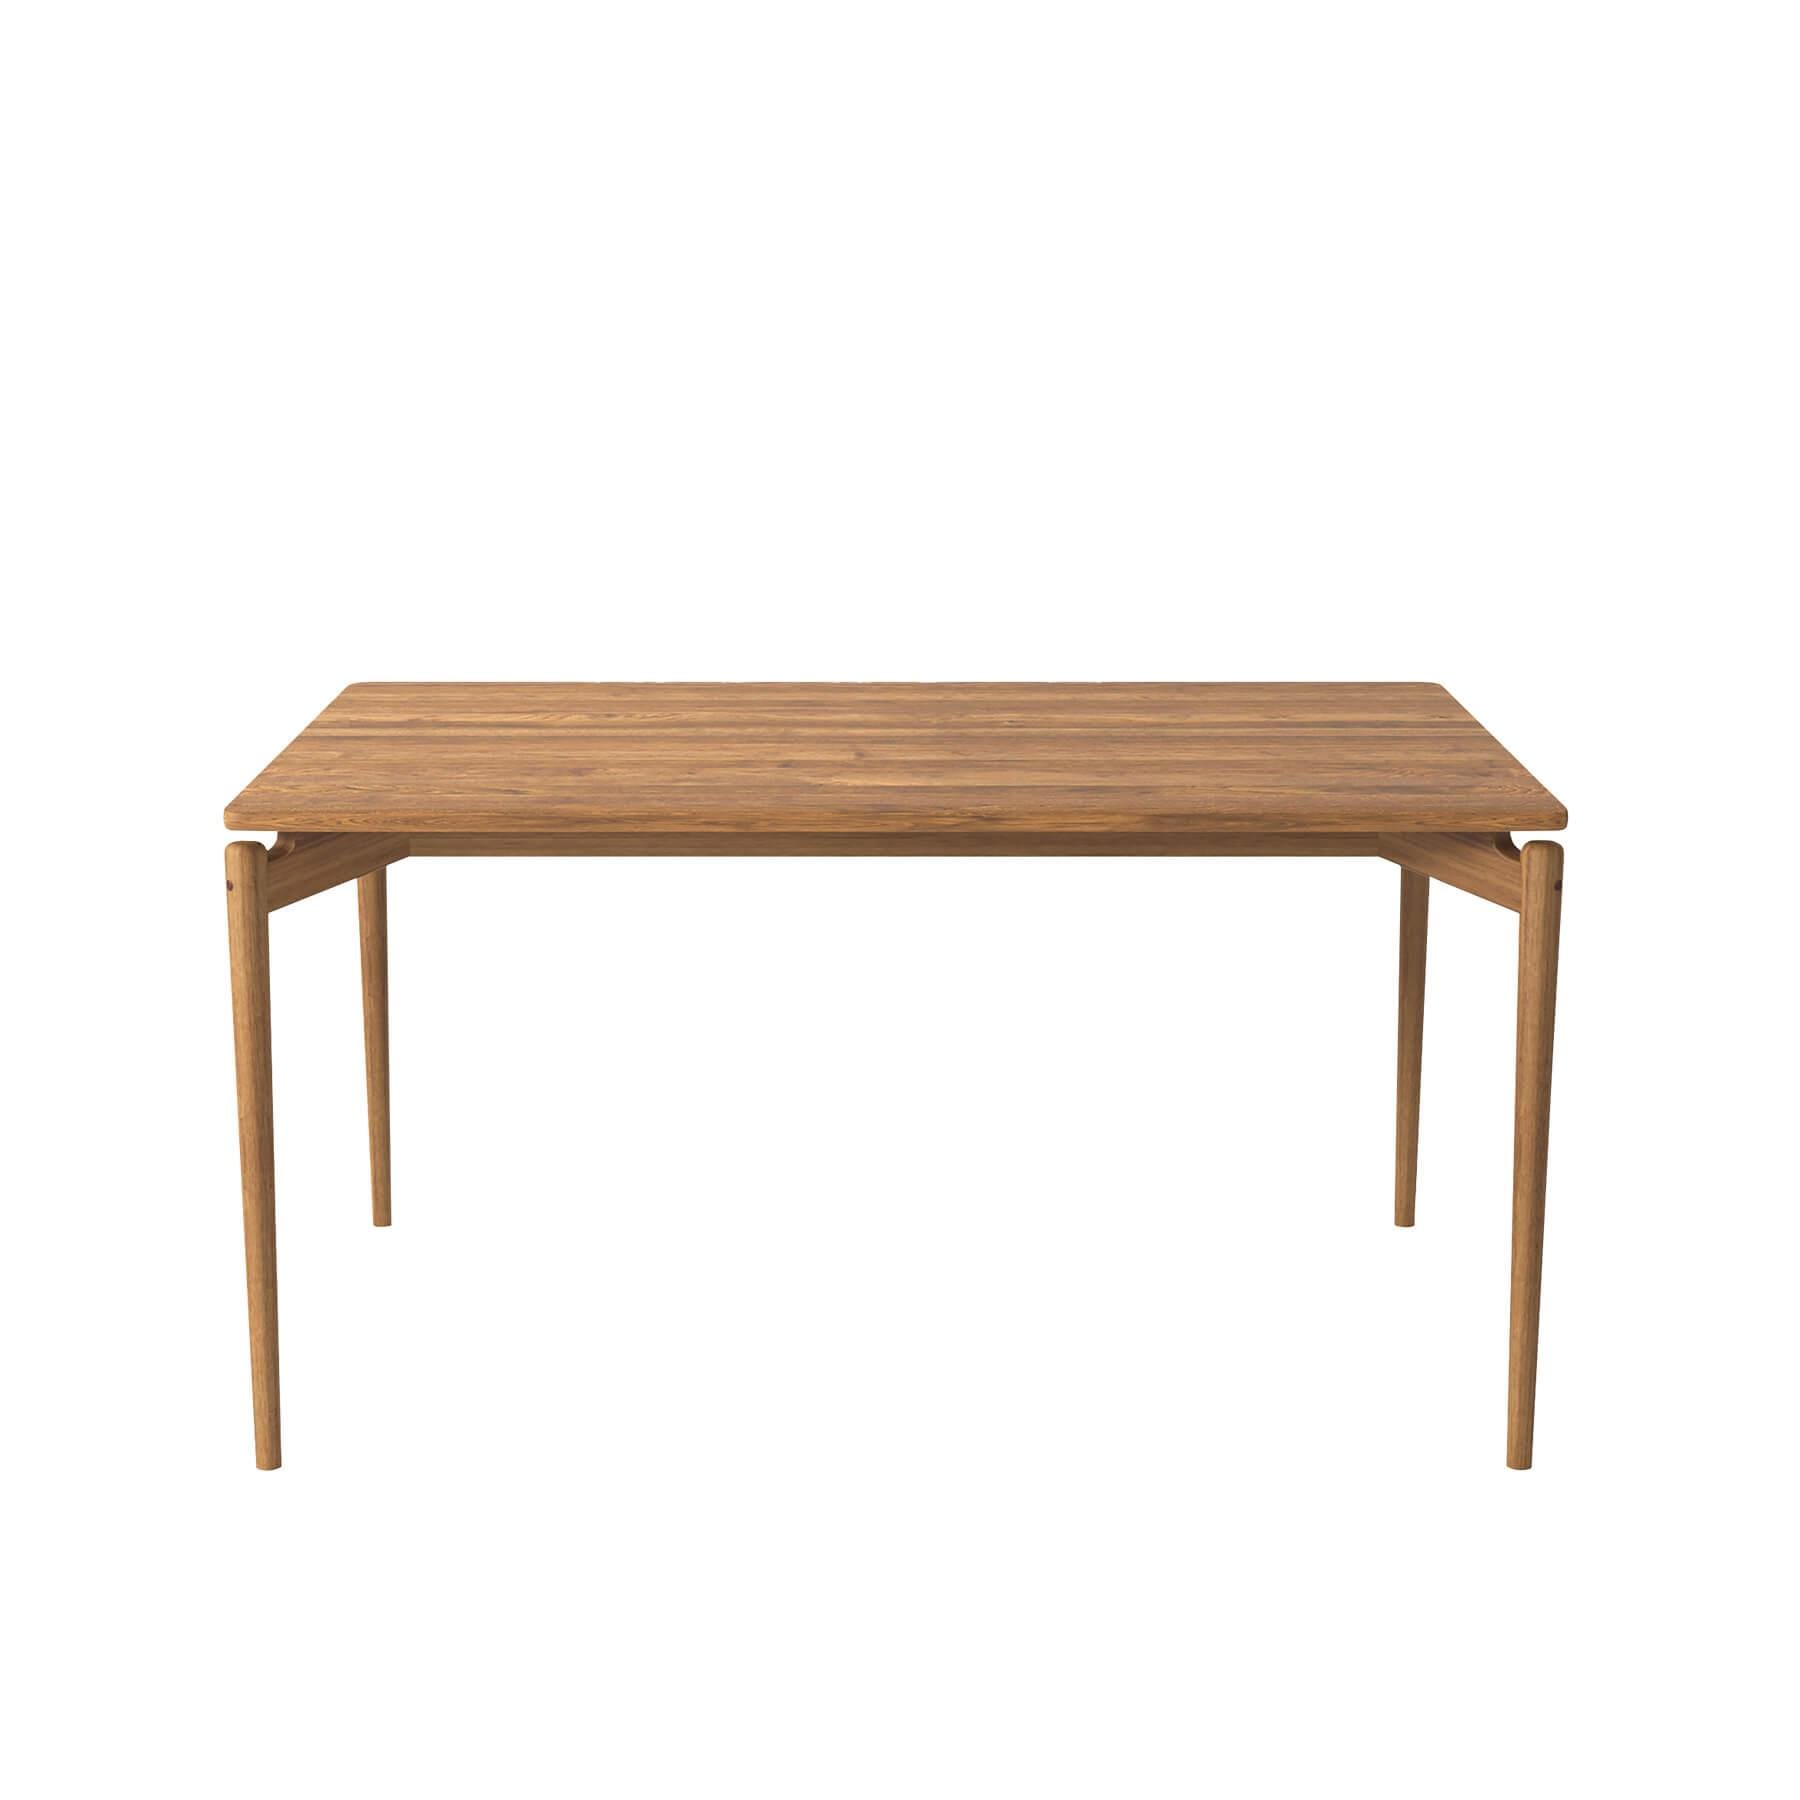 Bruunmunch Pure Dining Table 140cm Oak Natural Oil No Plates Light Wood Designer Furniture From Holloways Of Ludlow